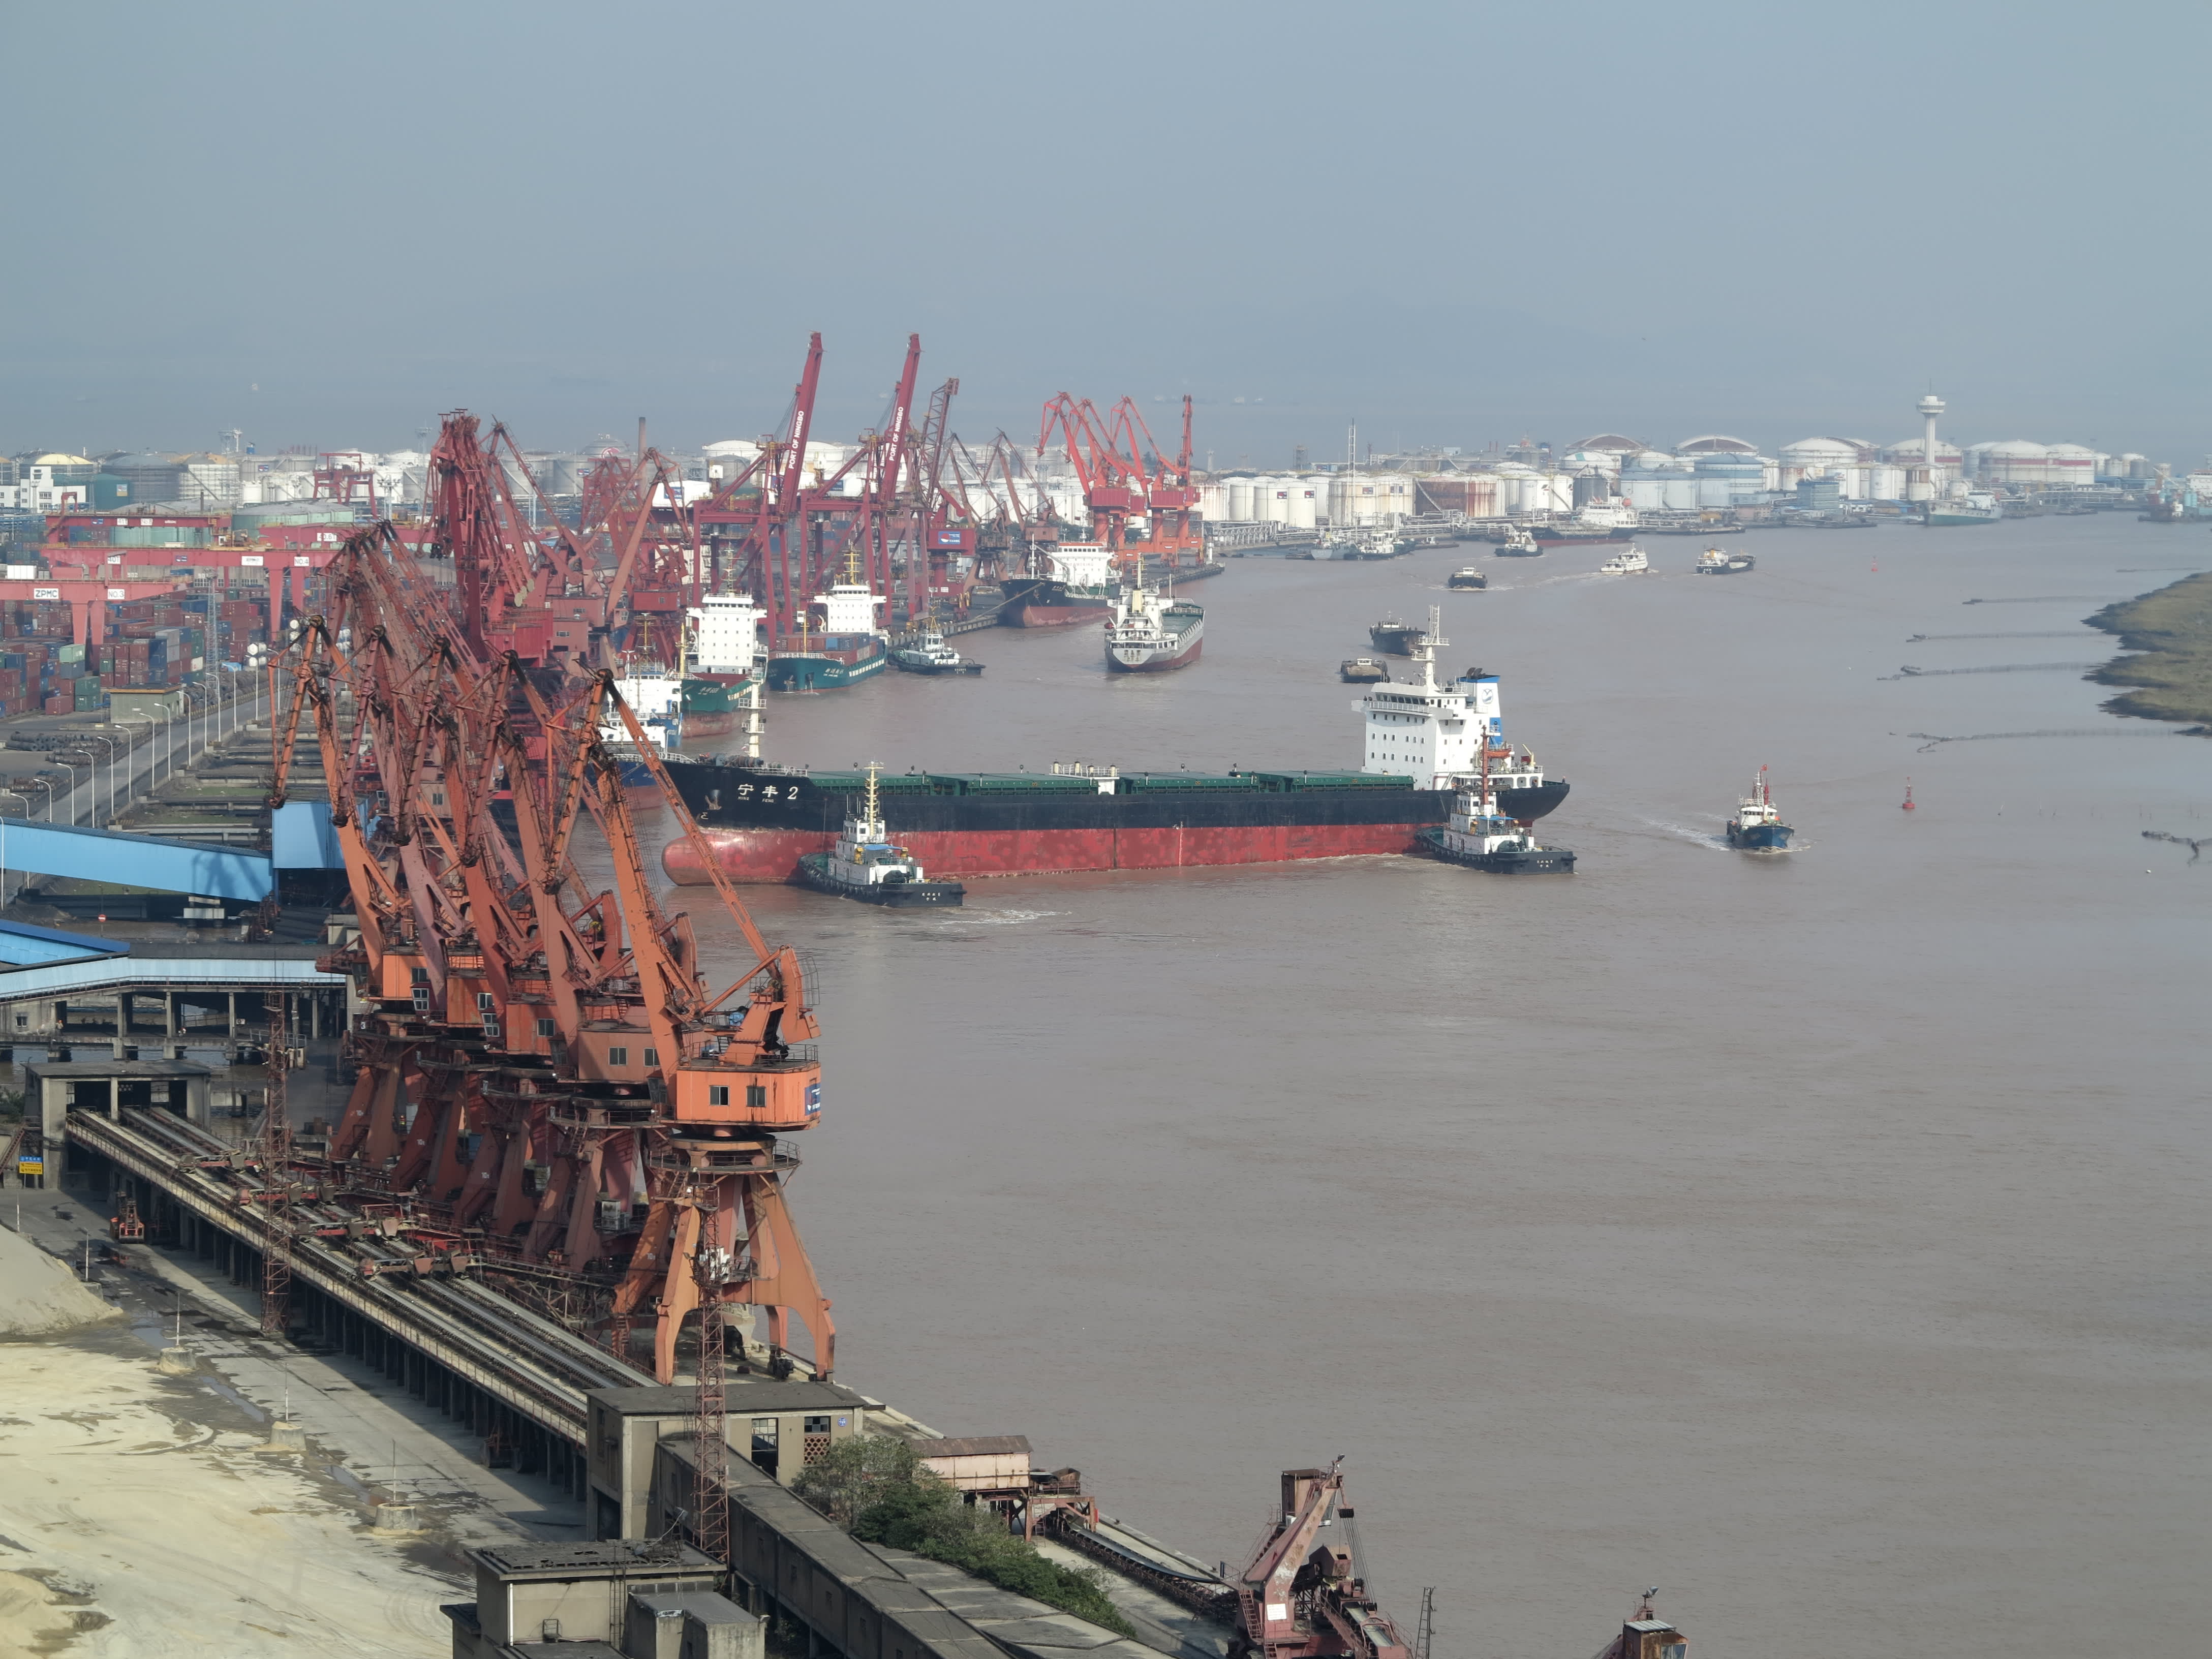 China's zero Covid stance set to disrupt shipping further, as key port partially shuts after one case